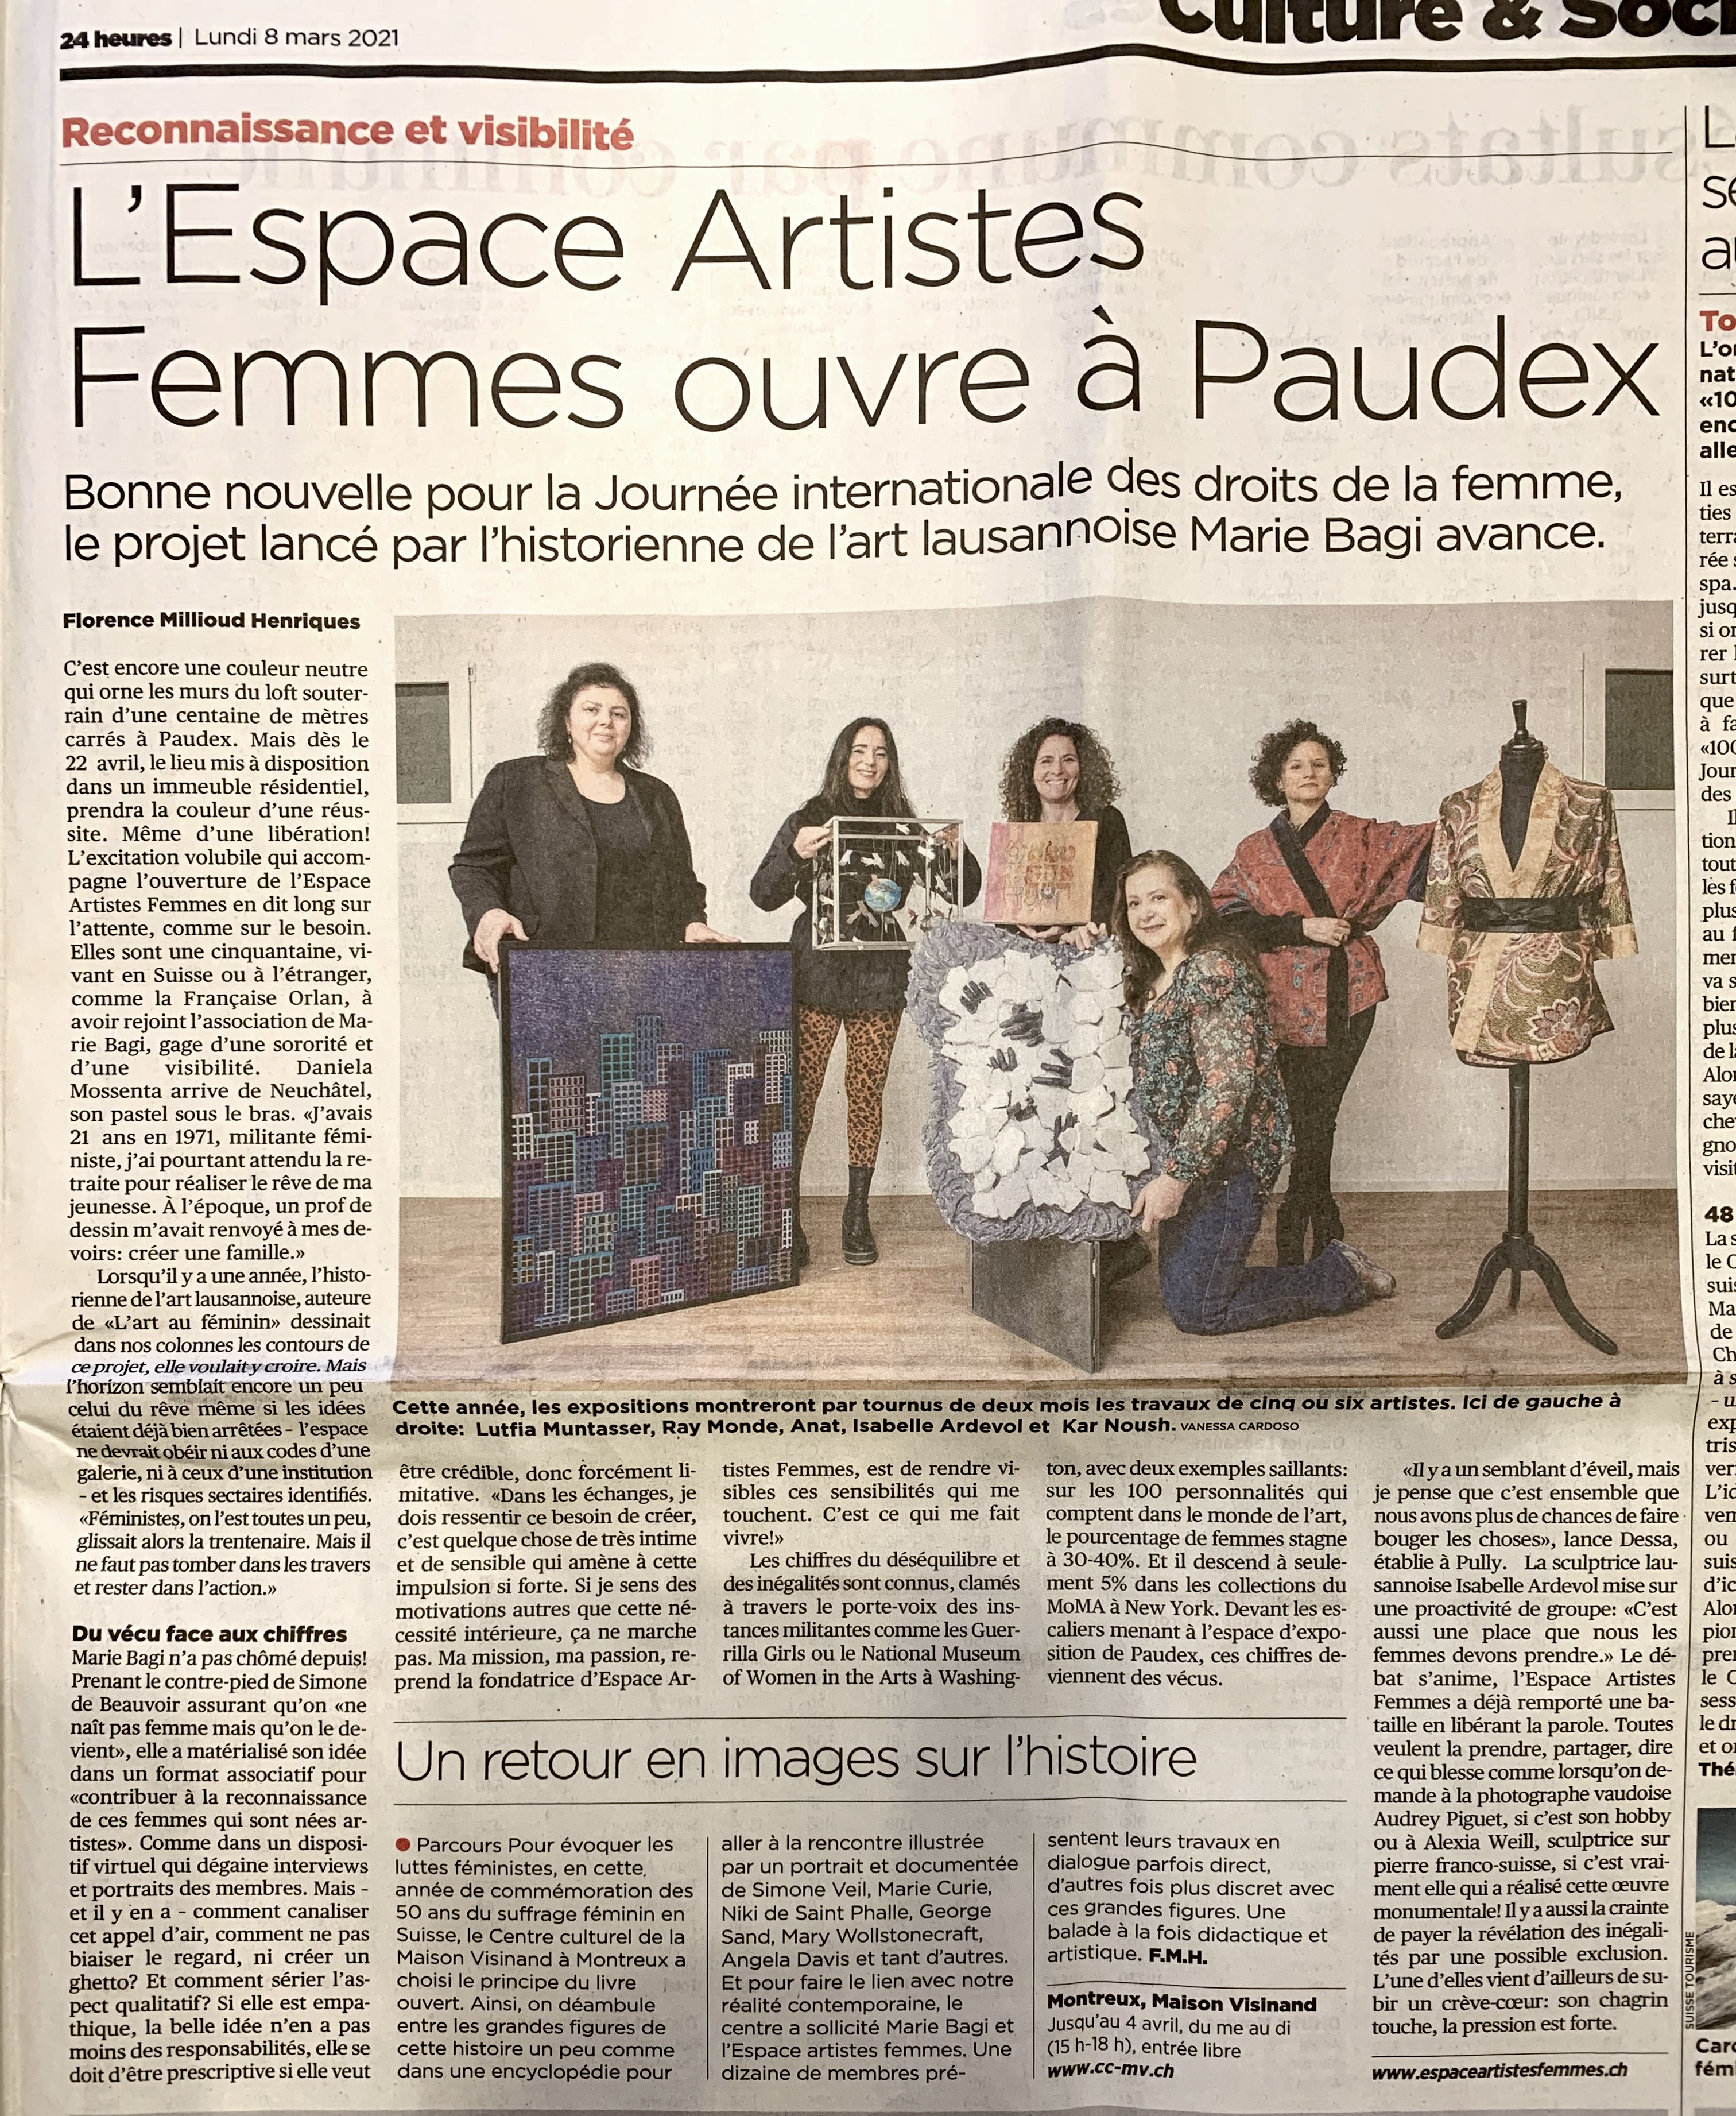  24 heures newspaper 2021: IZA - Isabelle Ardevol partcipates in the opening of  EAF (Espace artistes femmes) dedicated to women artists in Switzerland. 2020